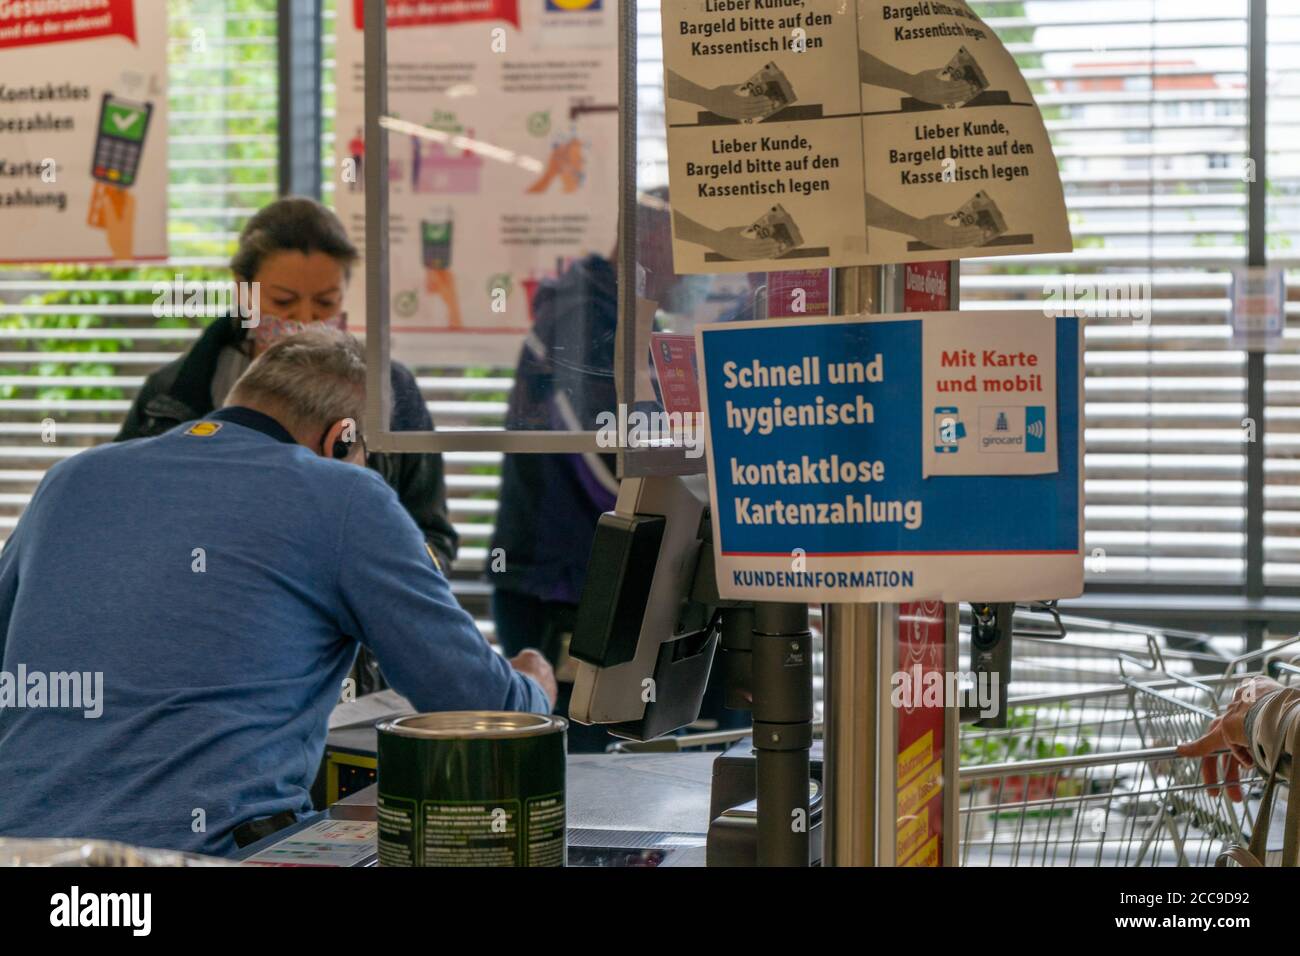 BERLIN, GERMANY - May 14, 2020: BERLIN, GERMANY May 14, 2020. Supermarket in Berlin under a protective screen because of Covid-19. Stock Photo